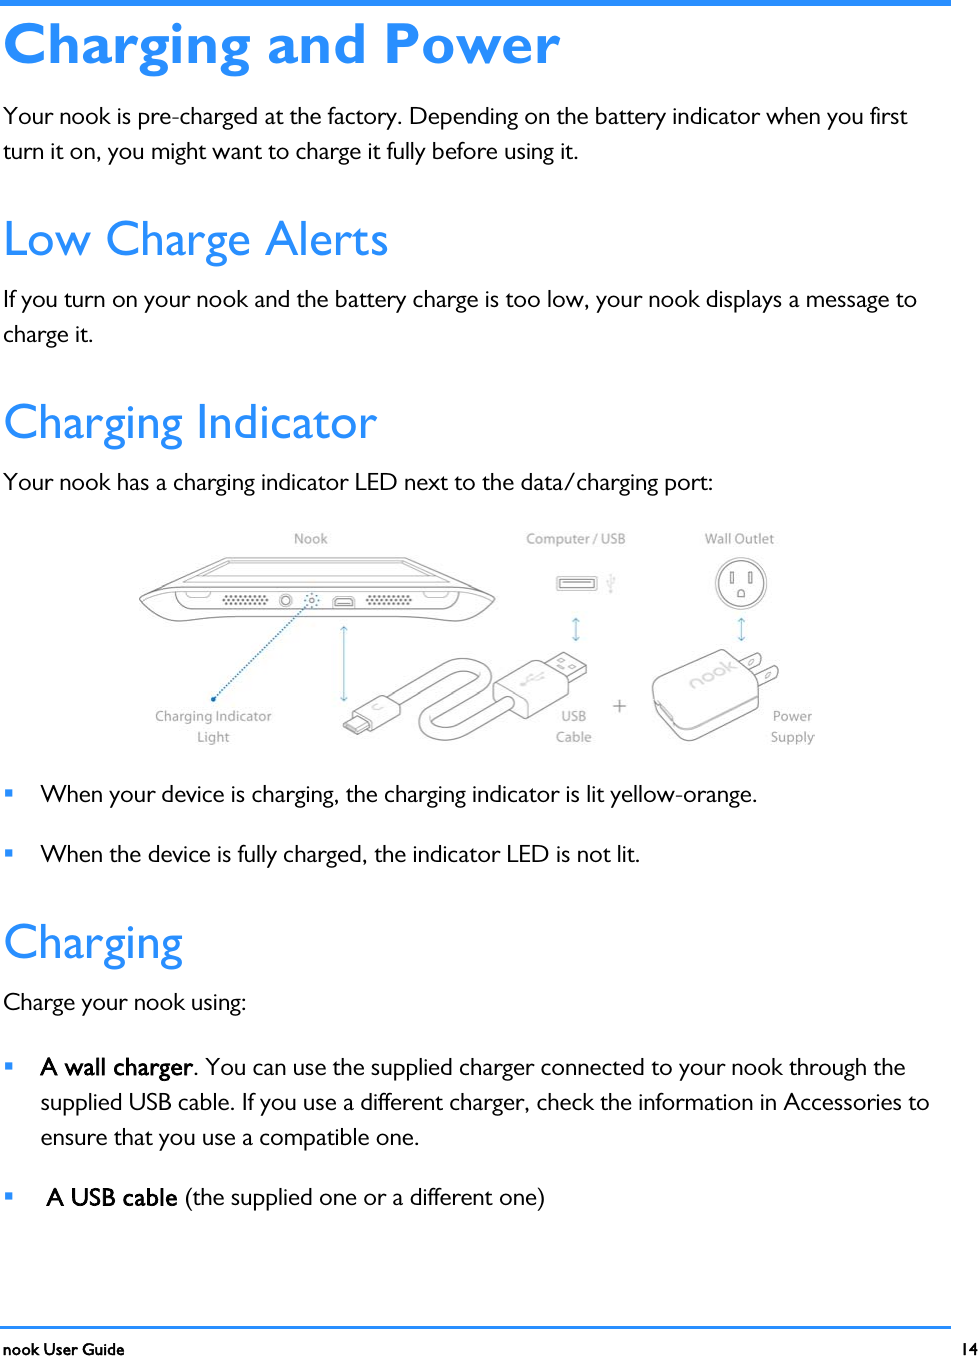  nook User Guide    14        Charging and Power Your nook is pre-charged at the factory. Depending on the battery indicator when you first turn it on, you might want to charge it fully before using it. Low Charge Alerts If you turn on your nook and the battery charge is too low, your nook displays a message to charge it. Charging Indicator Your nook has a charging indicator LED next to the data/charging port:   When your device is charging, the charging indicator is lit yellow-orange.  When the device is fully charged, the indicator LED is not lit. Charging Charge your nook using:  A wall charger. You can use the supplied charger connected to your nook through the supplied USB cable. If you use a different charger, check the information in Accessories to ensure that you use a compatible one.   A USB cable (the supplied one or a different one) 